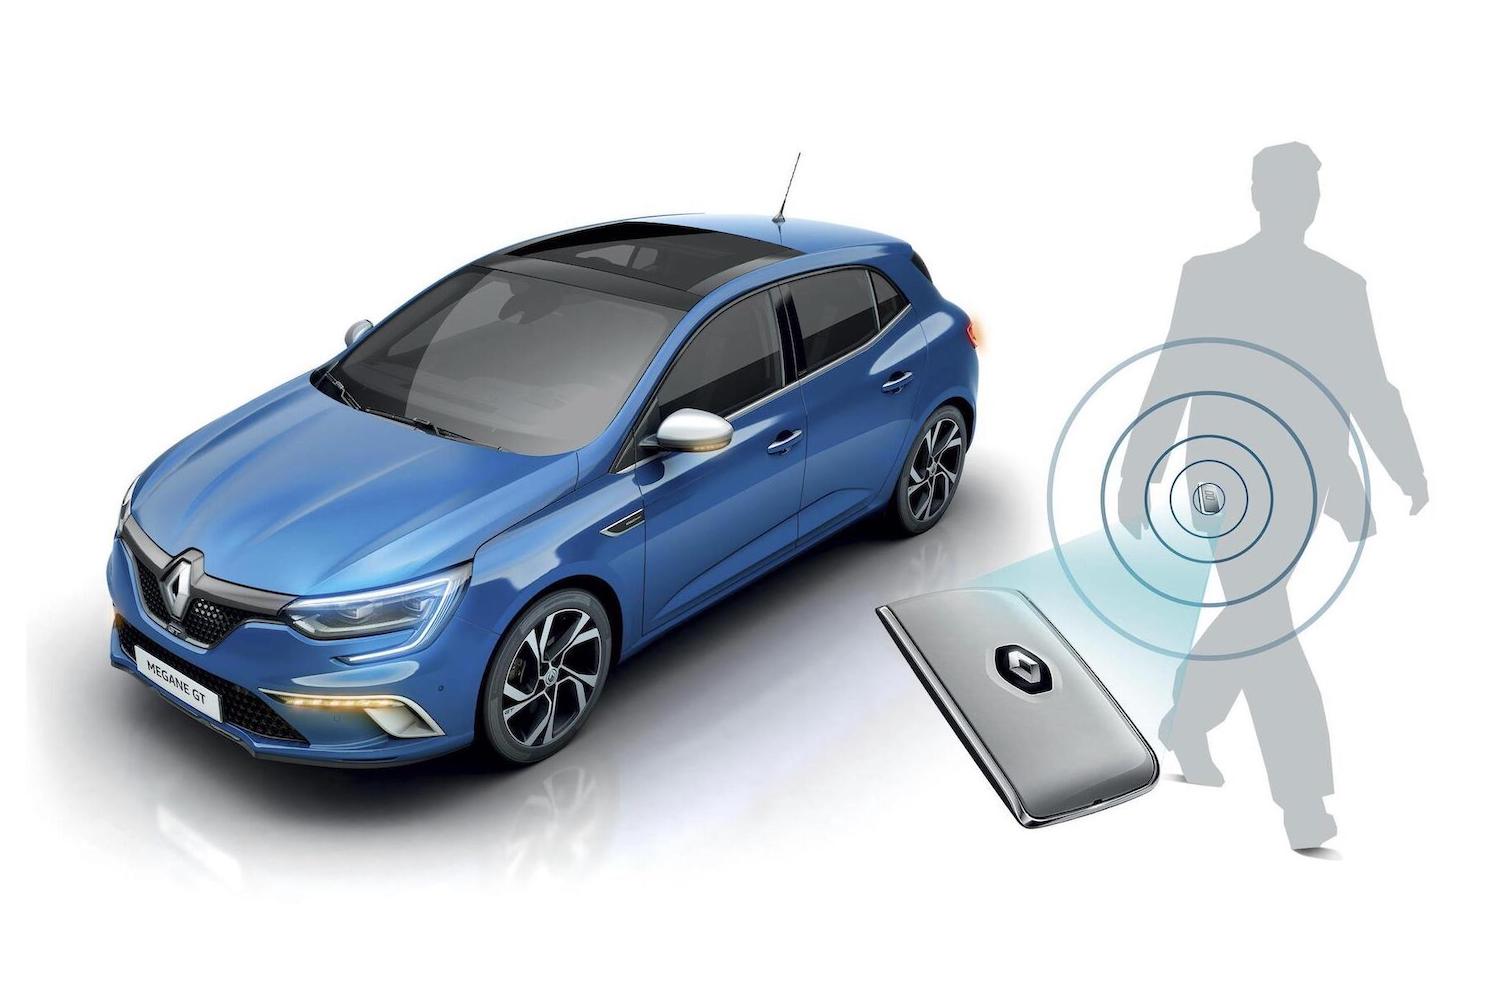 Complete Car Features | Renault celebrates 20 years of the hands-free key card